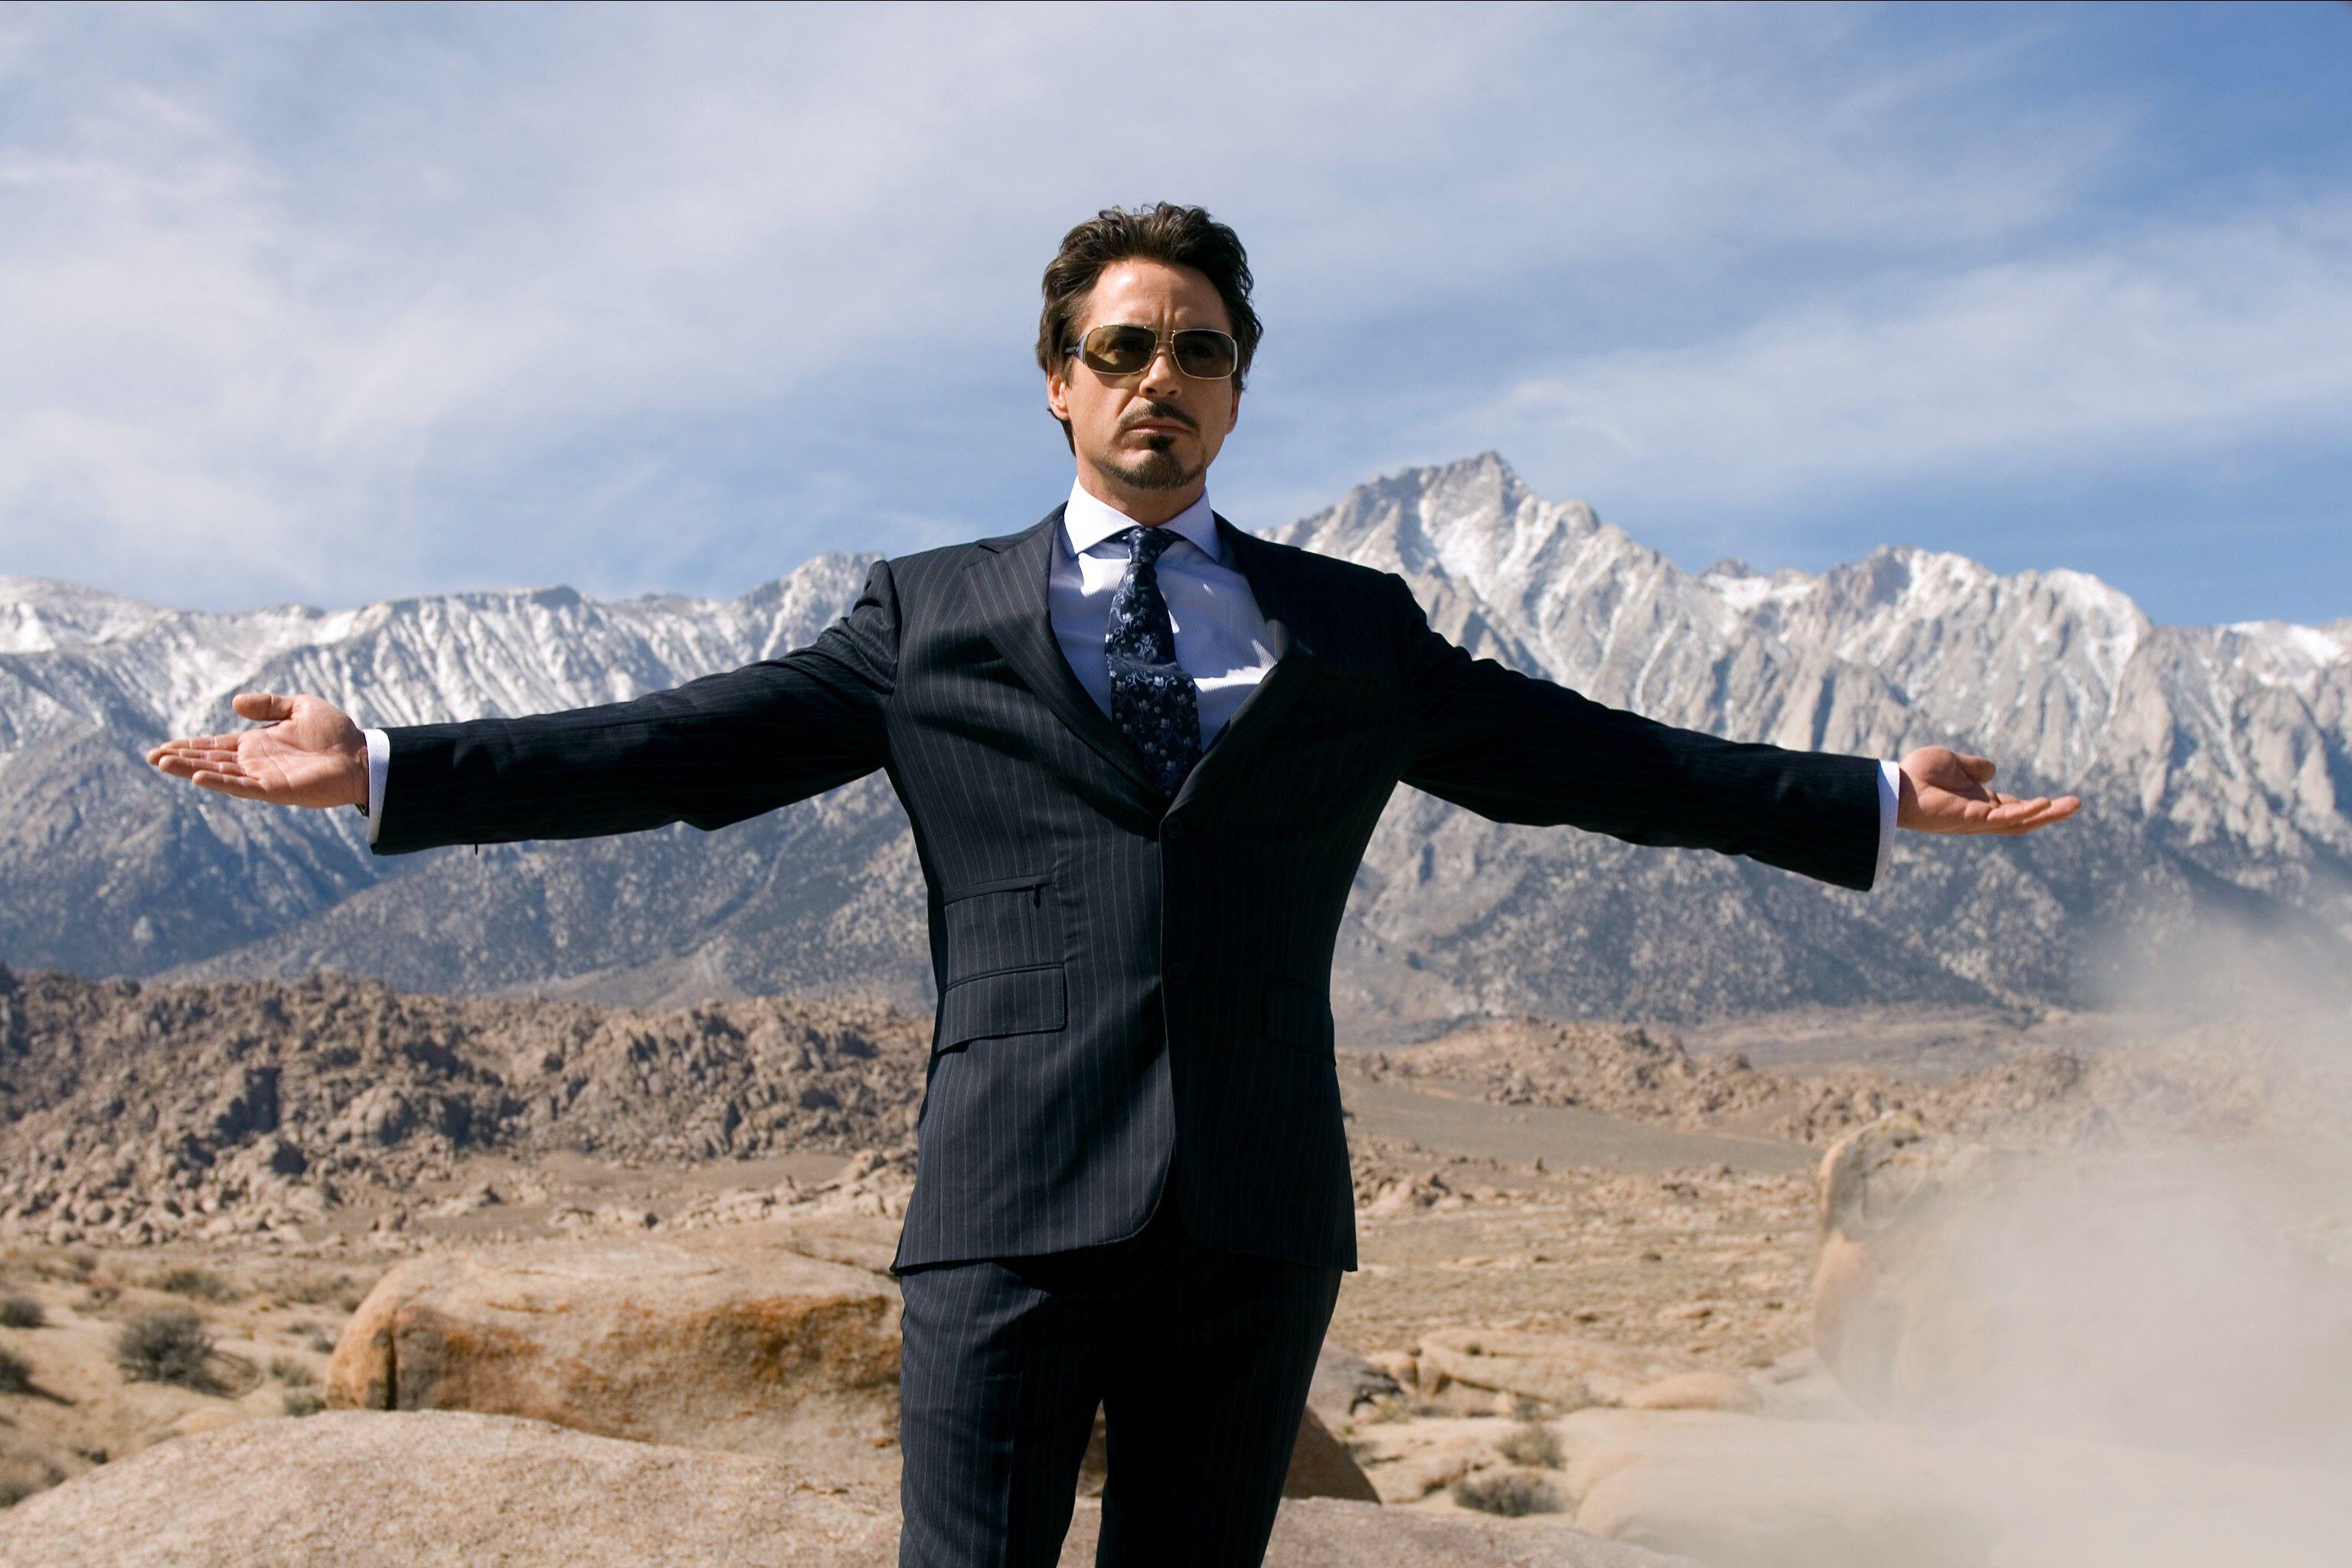 Tony Stark, played Robert Downey Jr, was held captive in the mountains